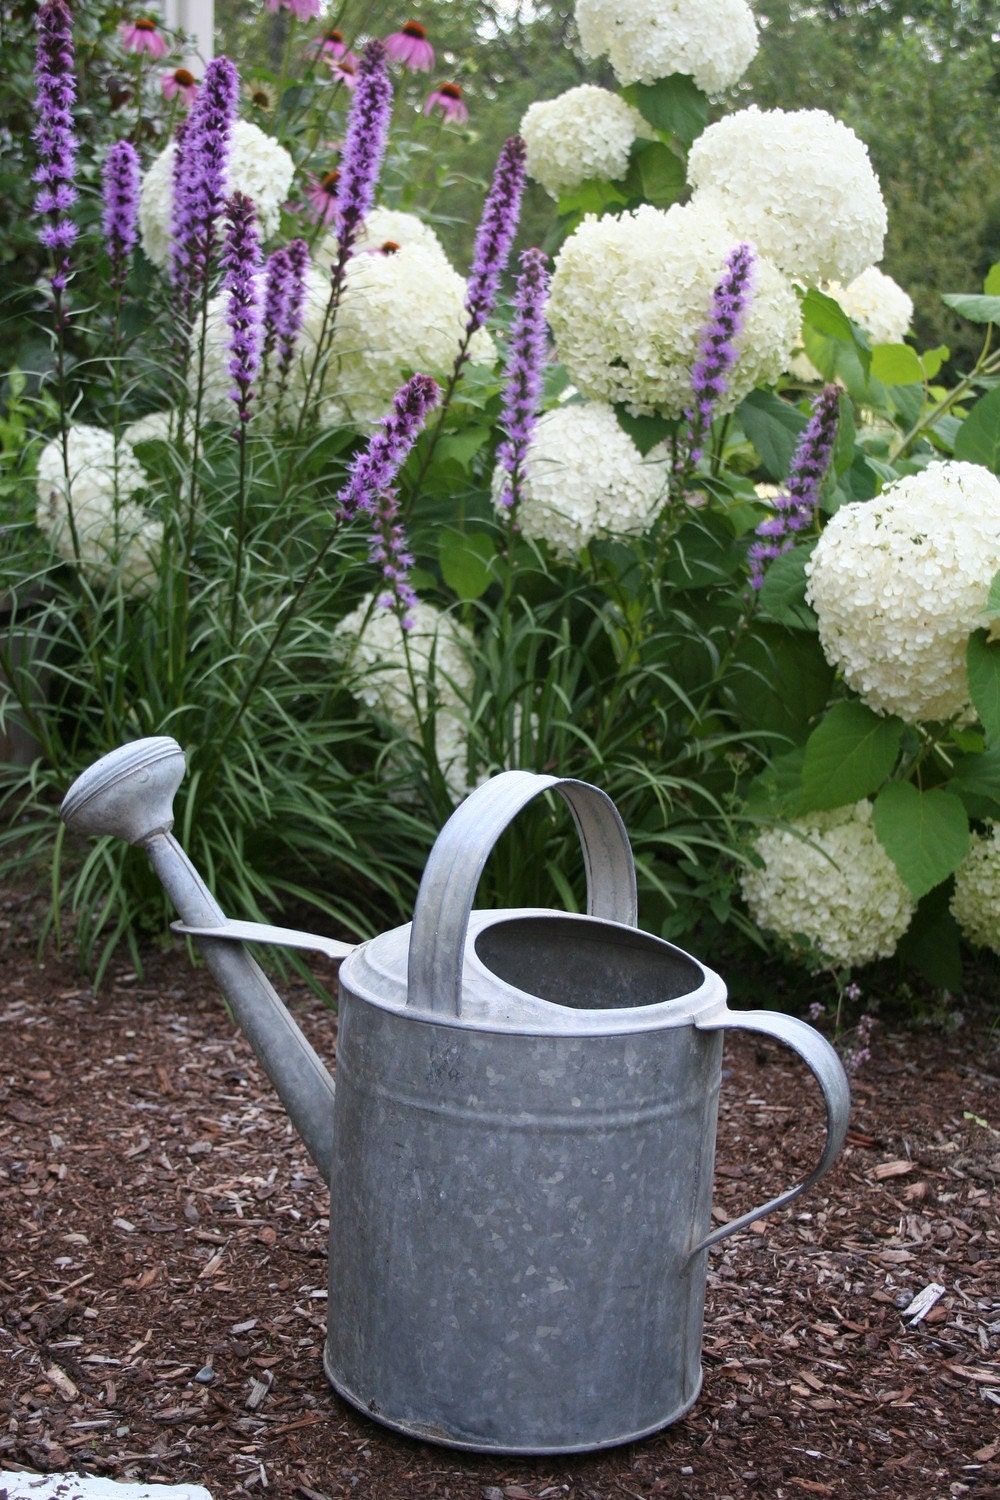 Watering can garden scene with flowers -  5 x 7" color print - CelesteCotaPhoto